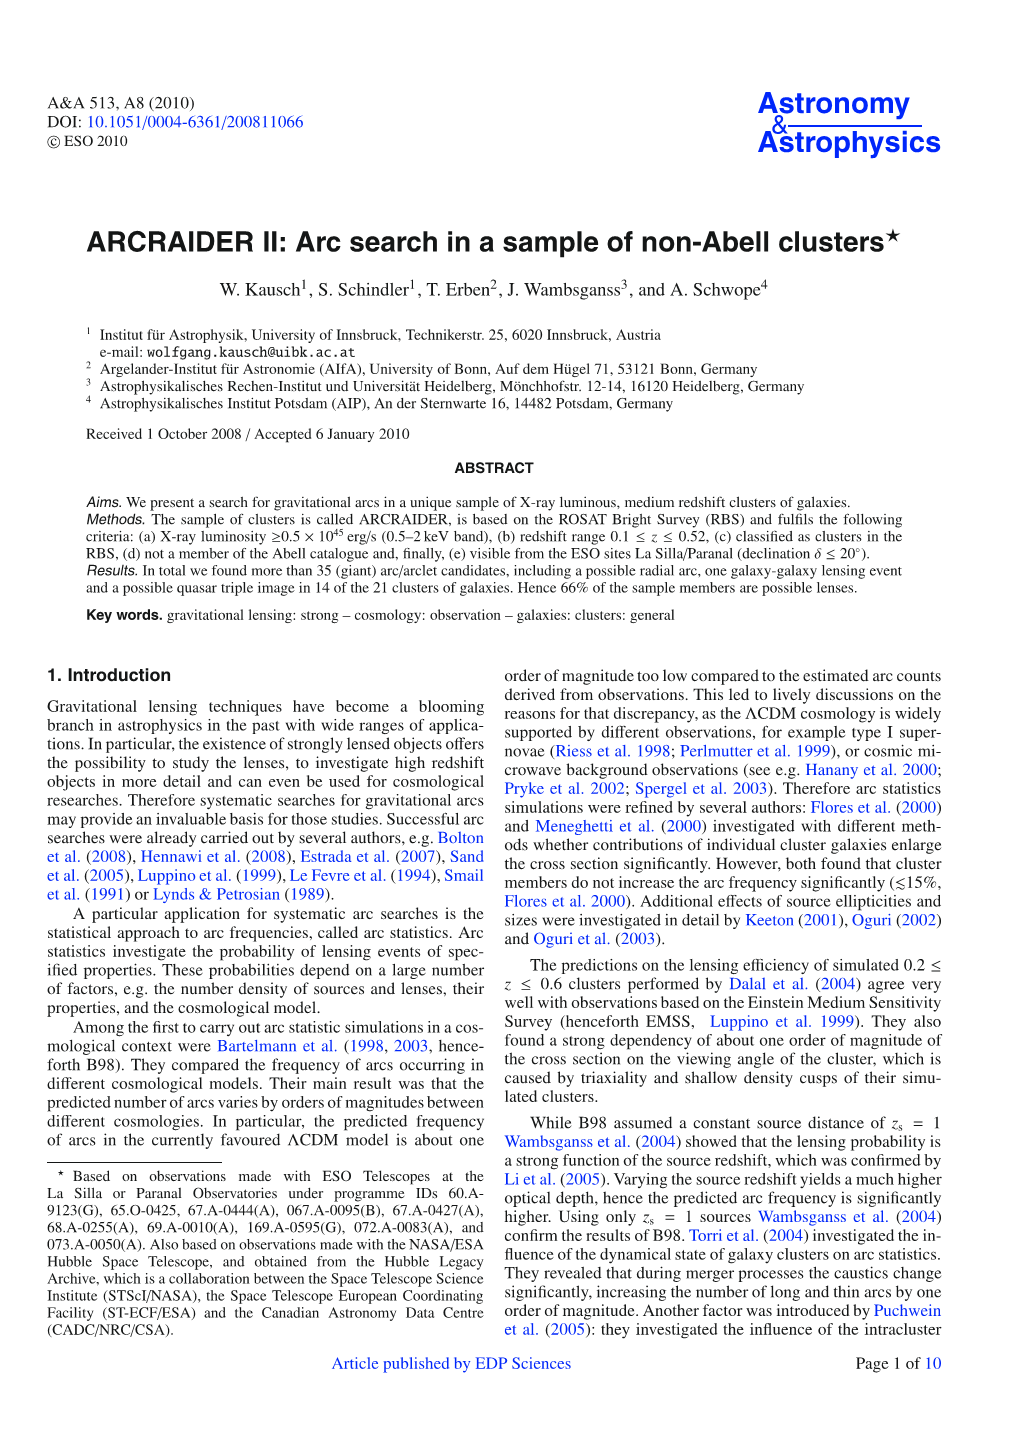 Arc Search in a Sample of Non-Abell Clusters